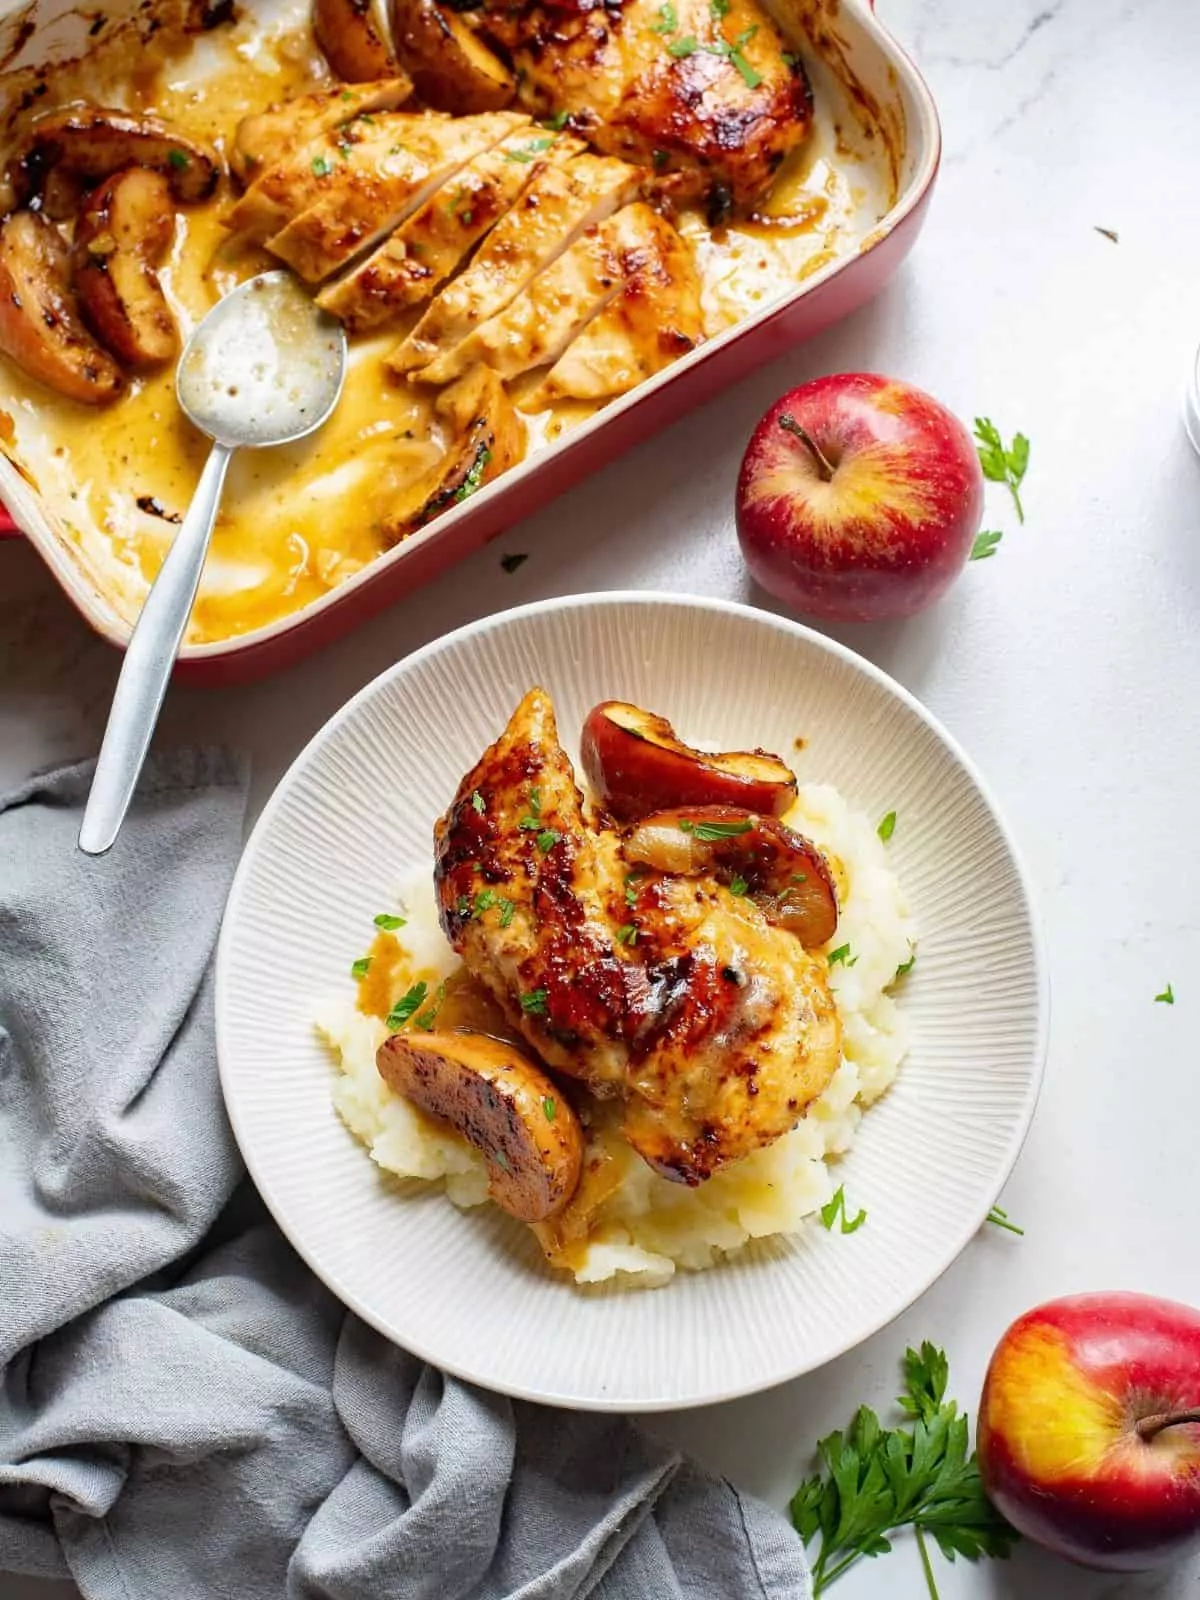 baked chicken with apples served over mashed potatoes on white plate.